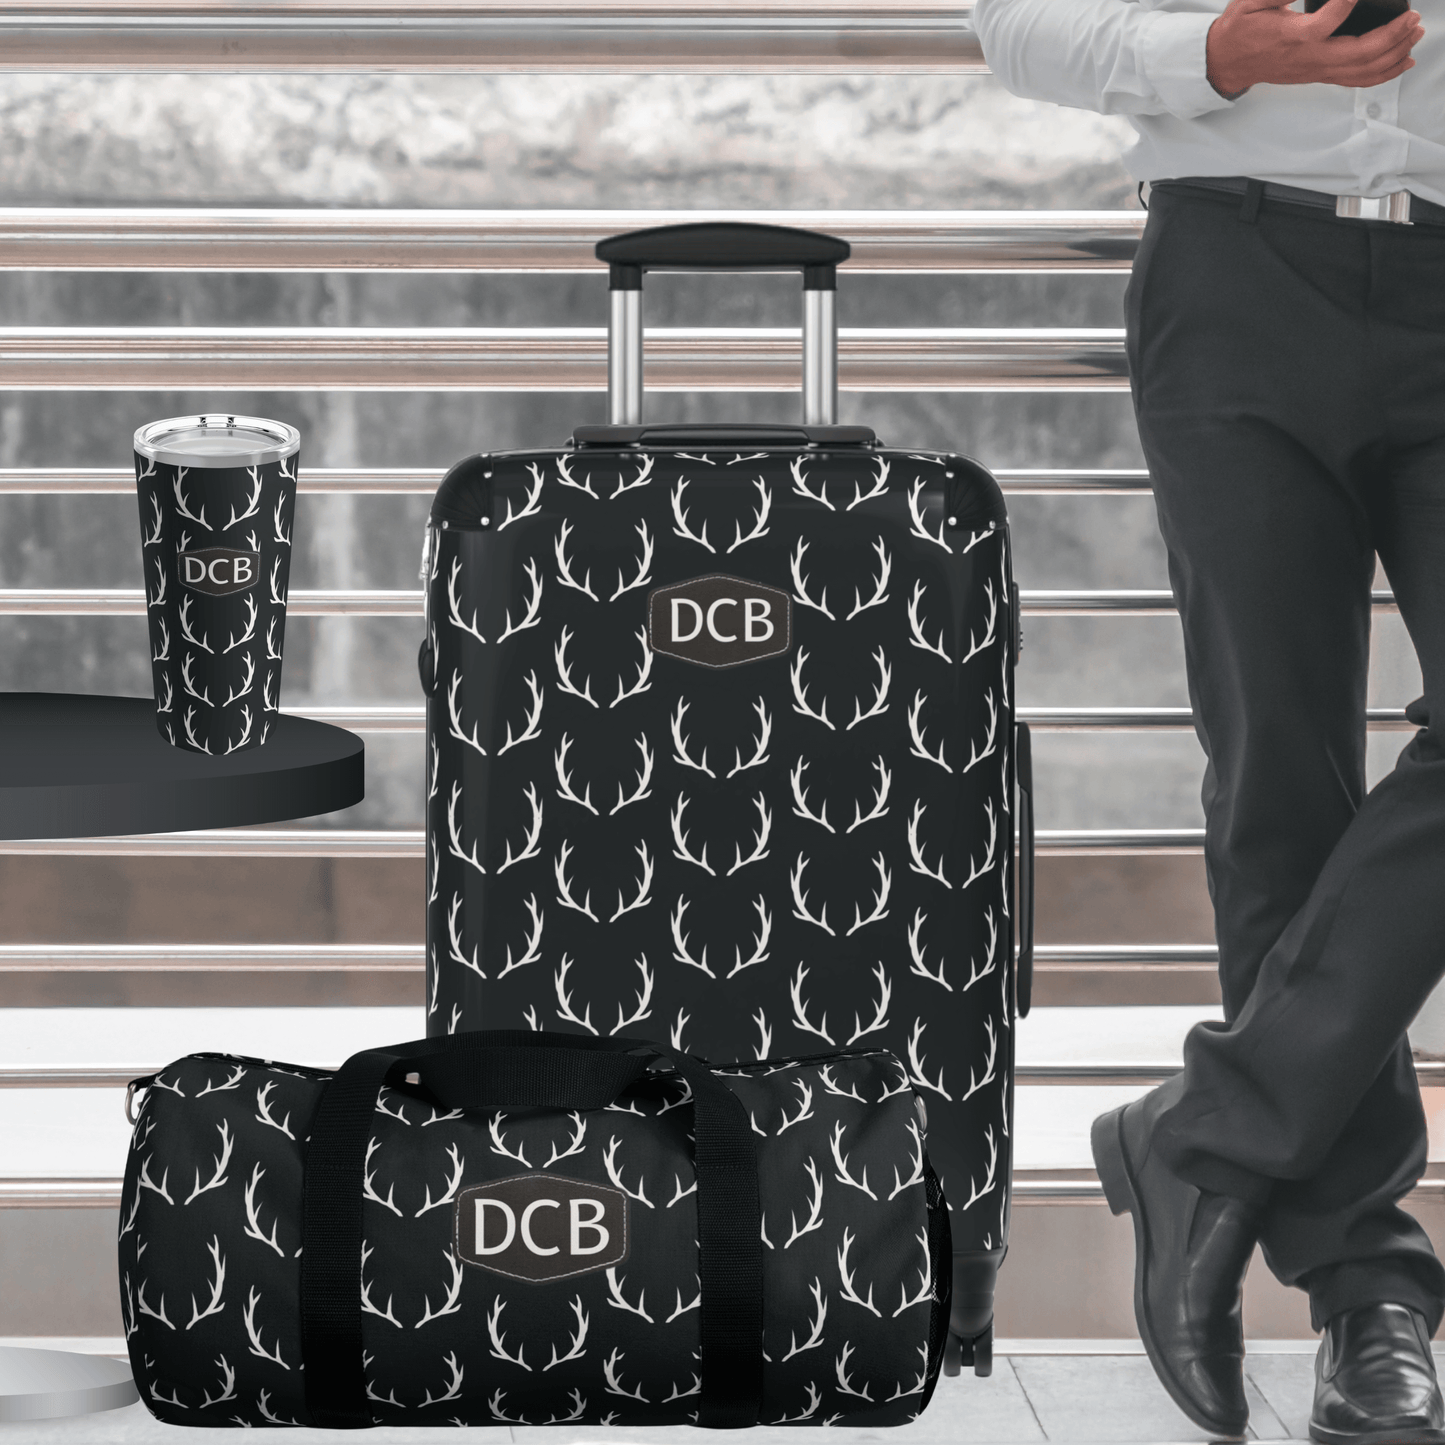 Our deer antler travel gear for men shows a monogrammed suitcase, tumbler cup and weekender bag for men with monogramming and the same deer antler design. This makes the perfect gift for deer hunters and outdoorsmen.